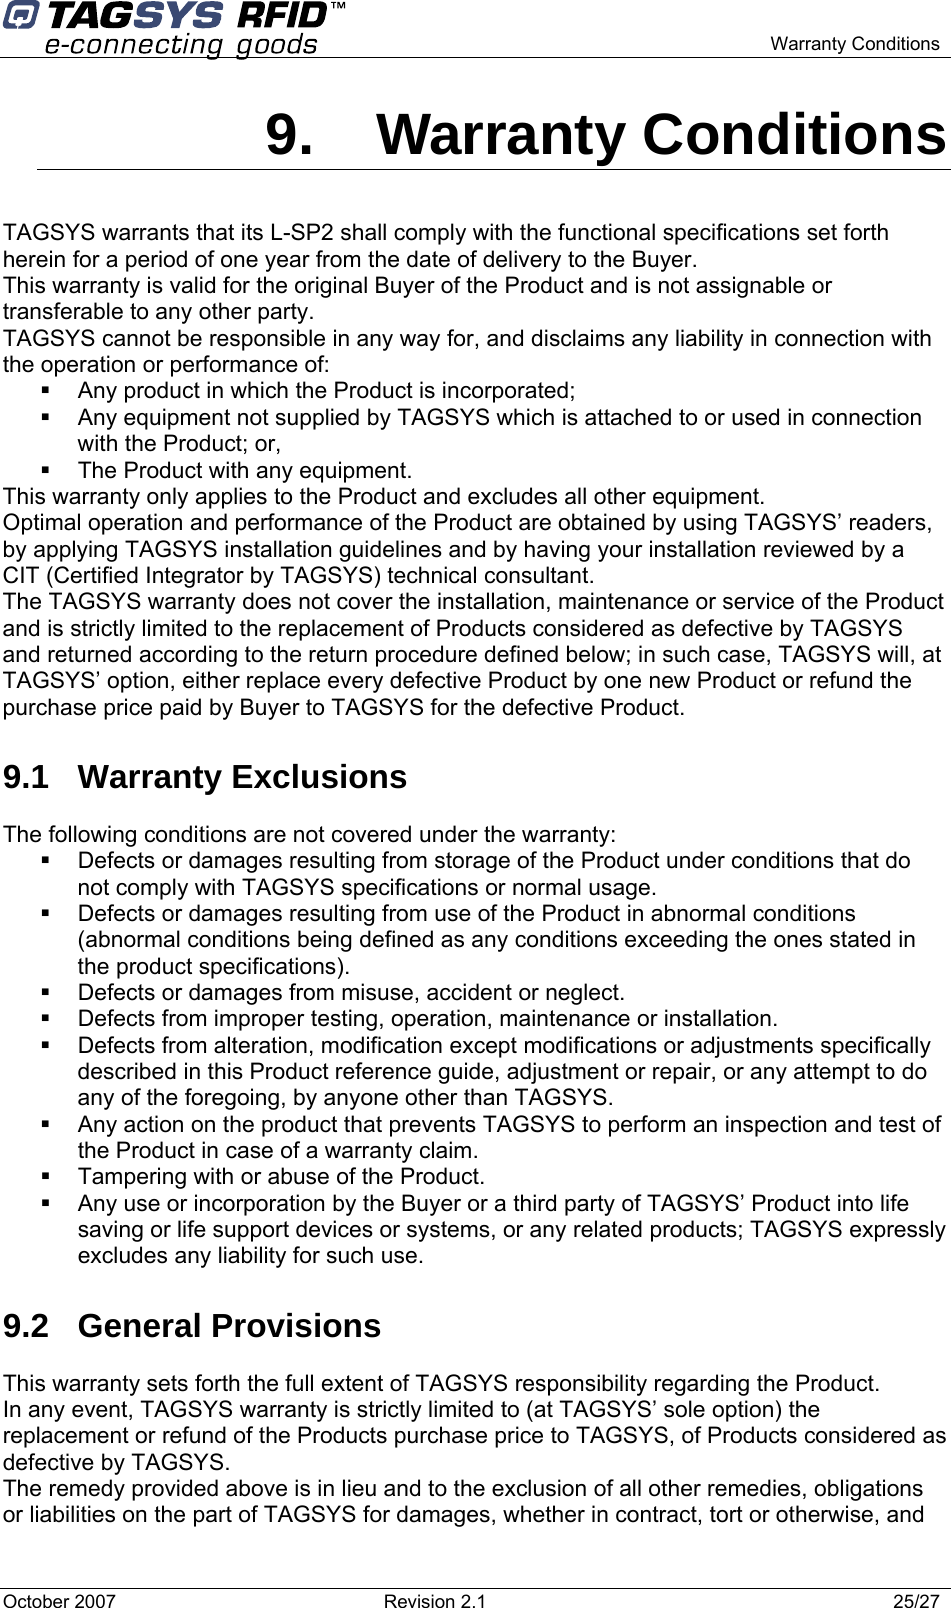    Warranty Conditions 9. Warranty Conditions TAGSYS warrants that its L-SP2 shall comply with the functional specifications set forth herein for a period of one year from the date of delivery to the Buyer. This warranty is valid for the original Buyer of the Product and is not assignable or transferable to any other party. TAGSYS cannot be responsible in any way for, and disclaims any liability in connection with the operation or performance of:   Any product in which the Product is incorporated;   Any equipment not supplied by TAGSYS which is attached to or used in connection with the Product; or,   The Product with any equipment. This warranty only applies to the Product and excludes all other equipment. Optimal operation and performance of the Product are obtained by using TAGSYS’ readers, by applying TAGSYS installation guidelines and by having your installation reviewed by a CIT (Certified Integrator by TAGSYS) technical consultant. The TAGSYS warranty does not cover the installation, maintenance or service of the Product and is strictly limited to the replacement of Products considered as defective by TAGSYS and returned according to the return procedure defined below; in such case, TAGSYS will, at TAGSYS’ option, either replace every defective Product by one new Product or refund the purchase price paid by Buyer to TAGSYS for the defective Product. 9.1  Warranty Exclusions  The following conditions are not covered under the warranty:   Defects or damages resulting from storage of the Product under conditions that do not comply with TAGSYS specifications or normal usage.   Defects or damages resulting from use of the Product in abnormal conditions (abnormal conditions being defined as any conditions exceeding the ones stated in the product specifications).   Defects or damages from misuse, accident or neglect.   Defects from improper testing, operation, maintenance or installation.   Defects from alteration, modification except modifications or adjustments specifically described in this Product reference guide, adjustment or repair, or any attempt to do any of the foregoing, by anyone other than TAGSYS.   Any action on the product that prevents TAGSYS to perform an inspection and test of the Product in case of a warranty claim.   Tampering with or abuse of the Product.   Any use or incorporation by the Buyer or a third party of TAGSYS’ Product into life saving or life support devices or systems, or any related products; TAGSYS expressly excludes any liability for such use. 9.2 General Provisions This warranty sets forth the full extent of TAGSYS responsibility regarding the Product. In any event, TAGSYS warranty is strictly limited to (at TAGSYS’ sole option) the replacement or refund of the Products purchase price to TAGSYS, of Products considered as defective by TAGSYS. The remedy provided above is in lieu and to the exclusion of all other remedies, obligations or liabilities on the part of TAGSYS for damages, whether in contract, tort or otherwise, and October 2007  Revision 2.1  25/27 